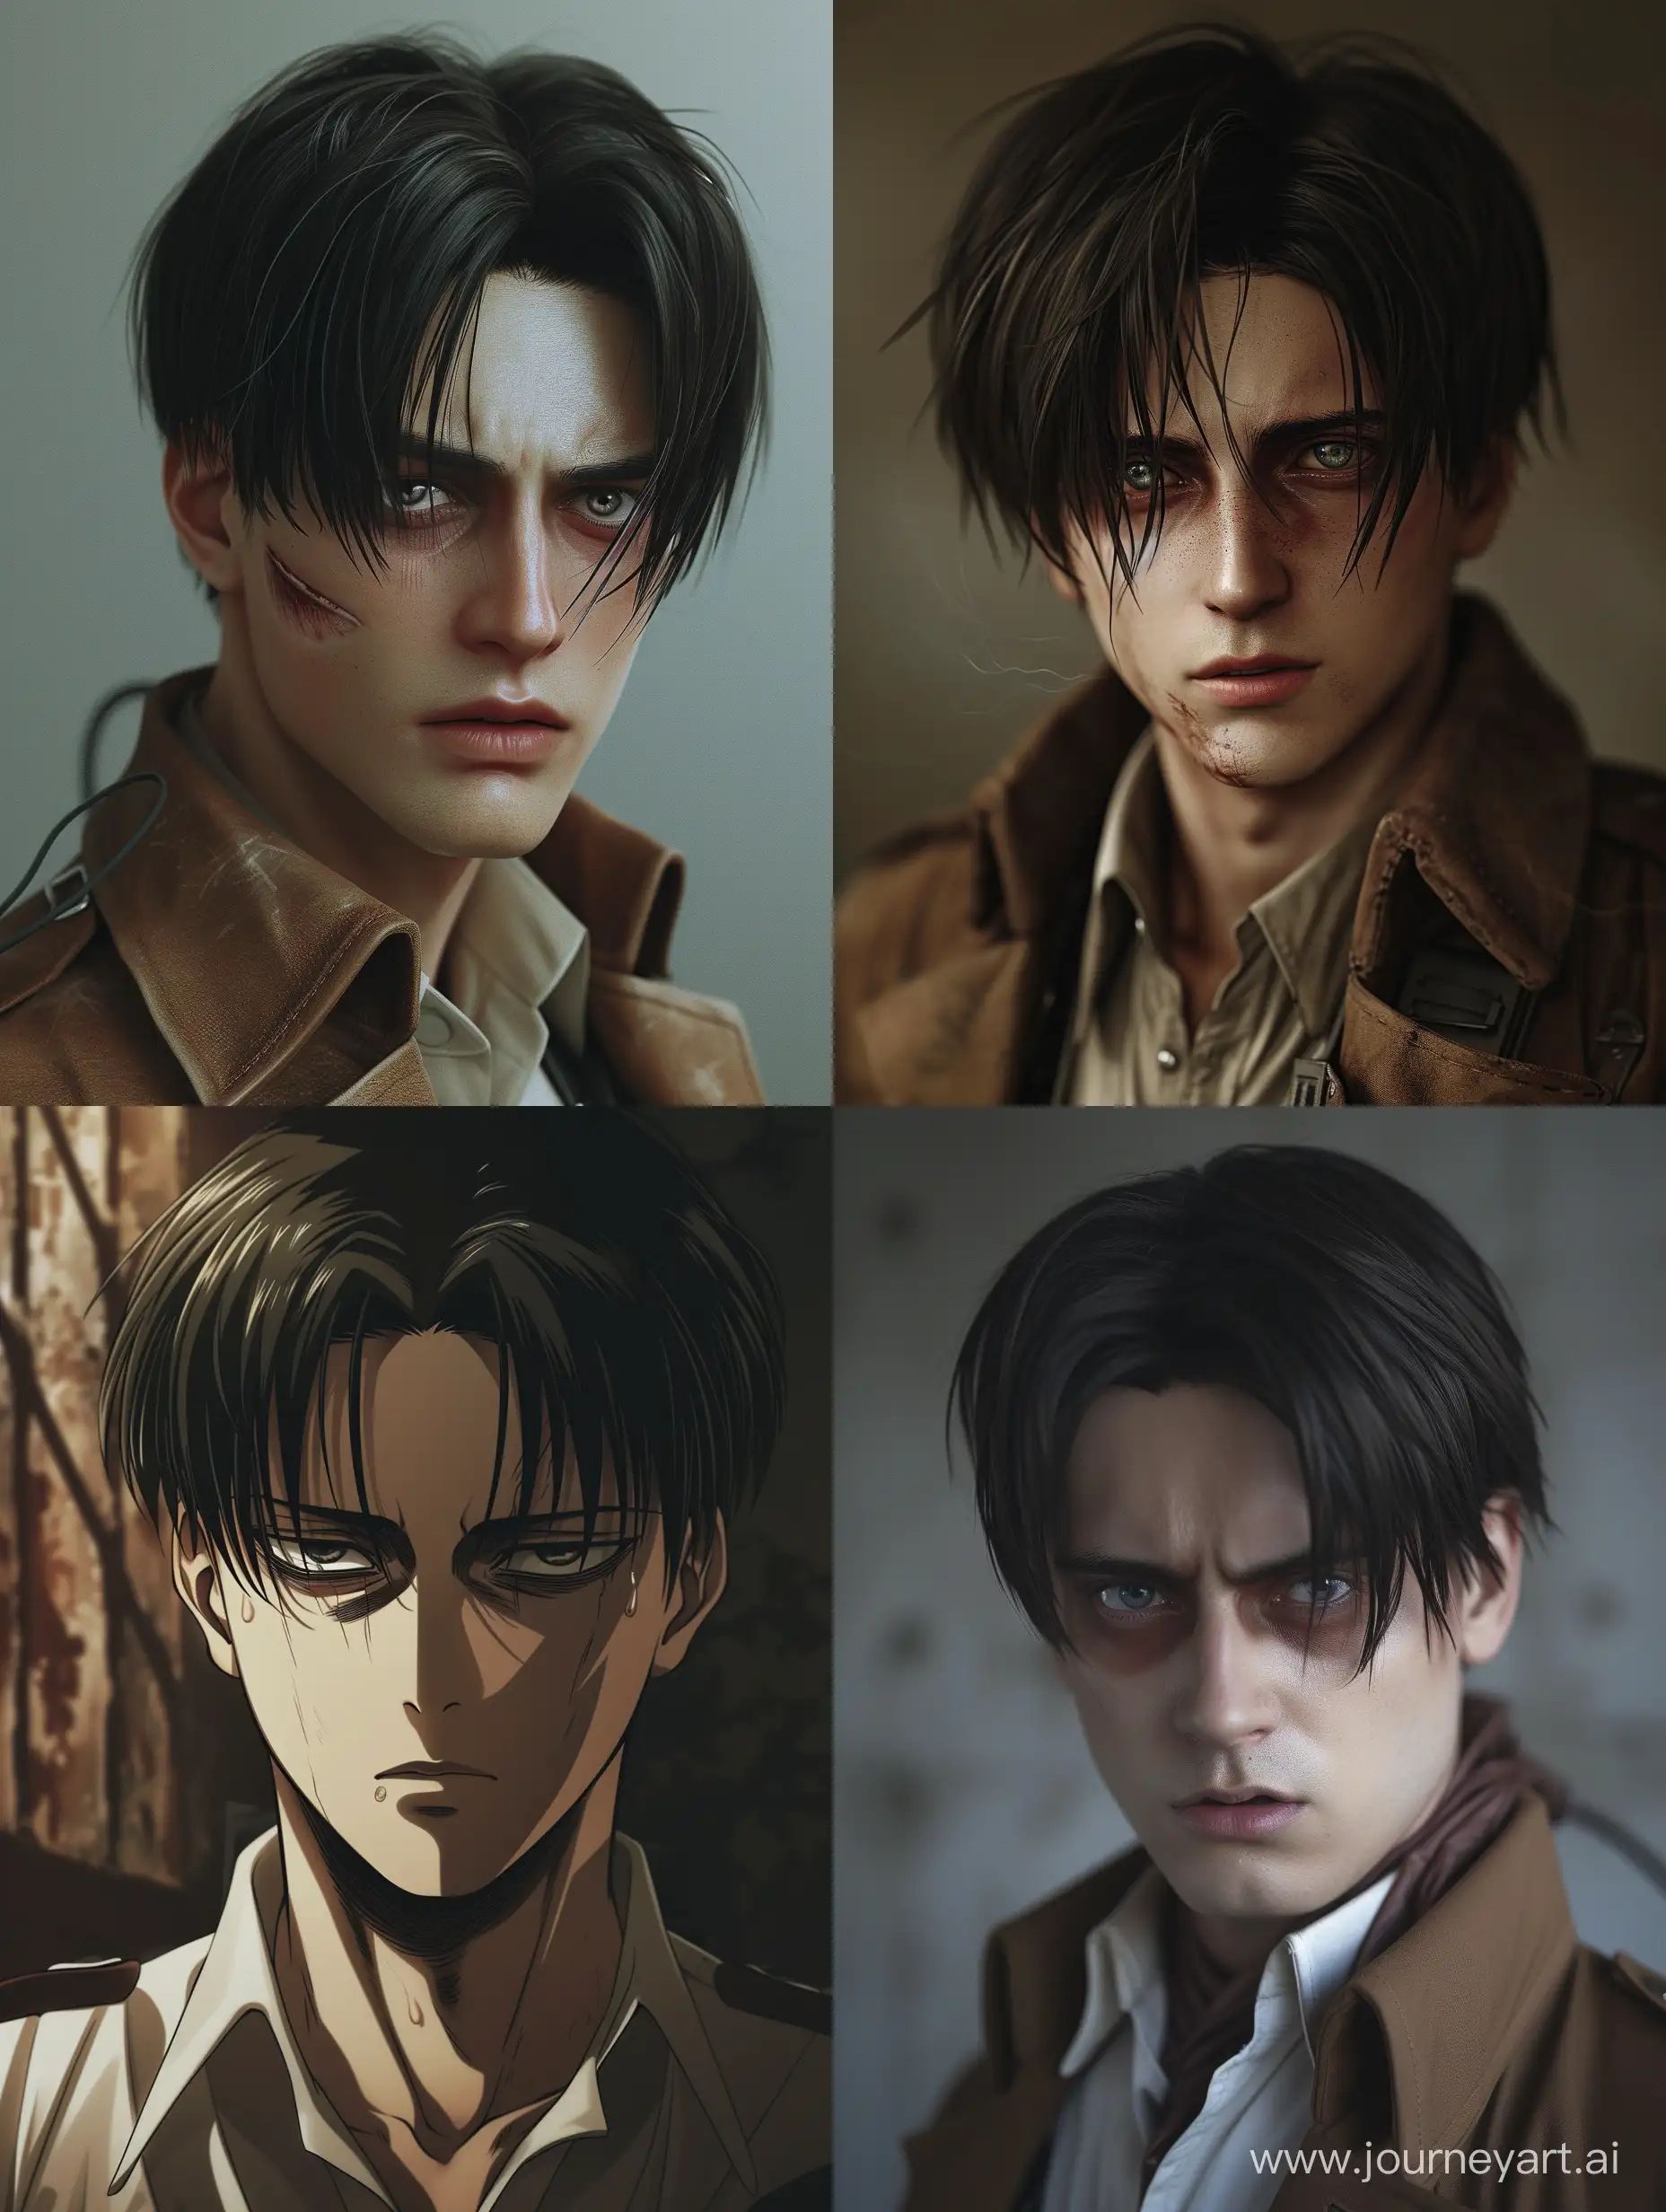 Photographic Levi Ackerman from Attack on Titan, in his 30s, with normal dark circles, slight mocking smirk, narrow bored eyes with prominent whites